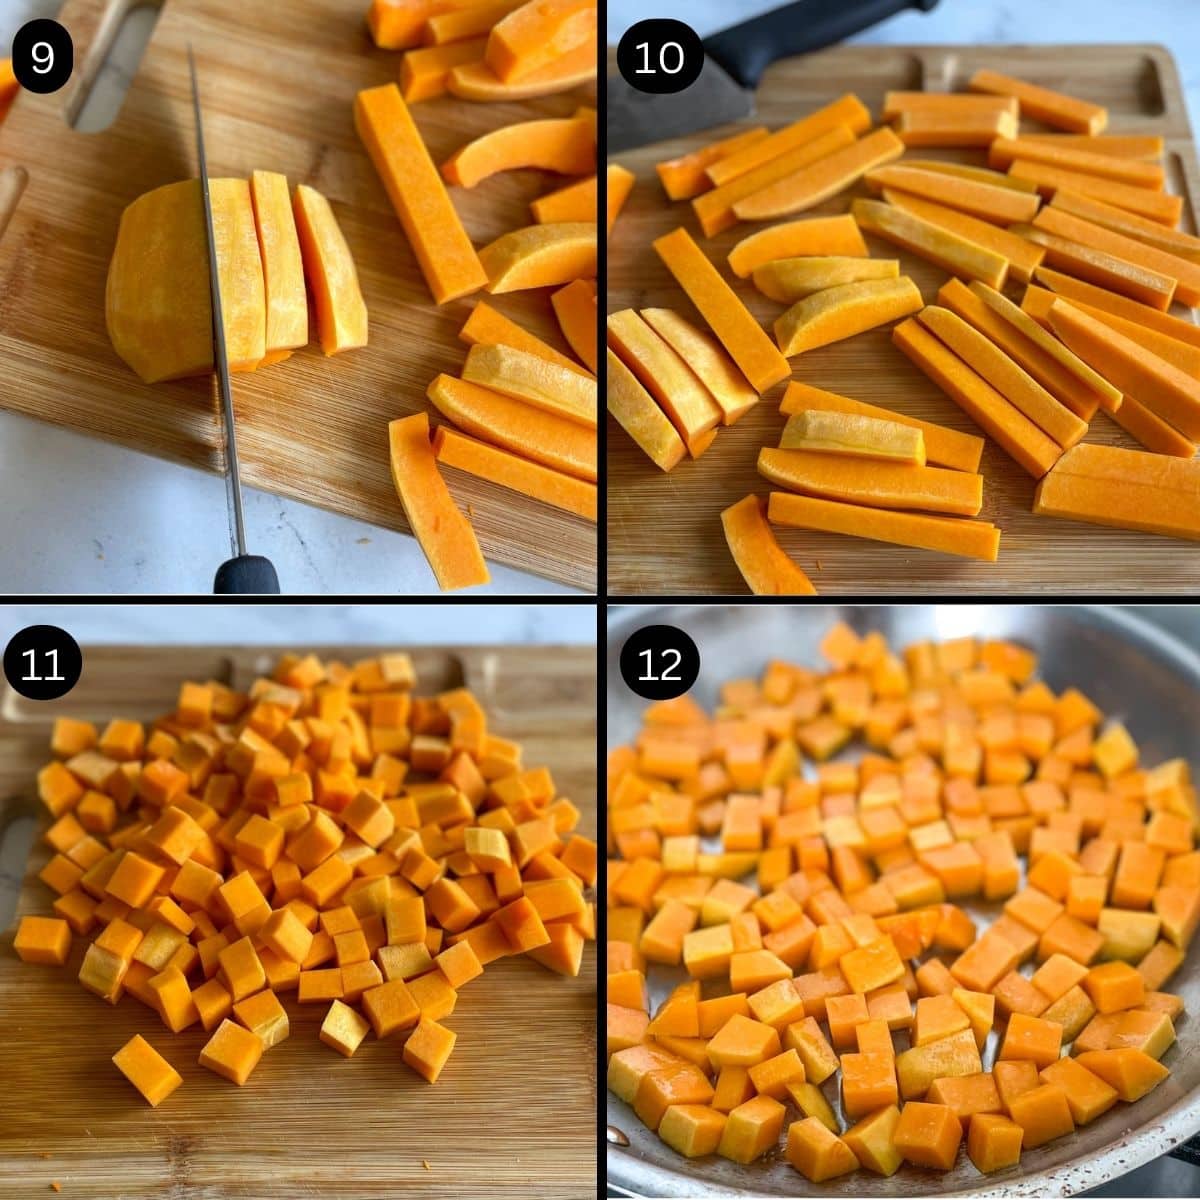 Steps 9 through 12 of how to properly cut a butternut squash are shown.